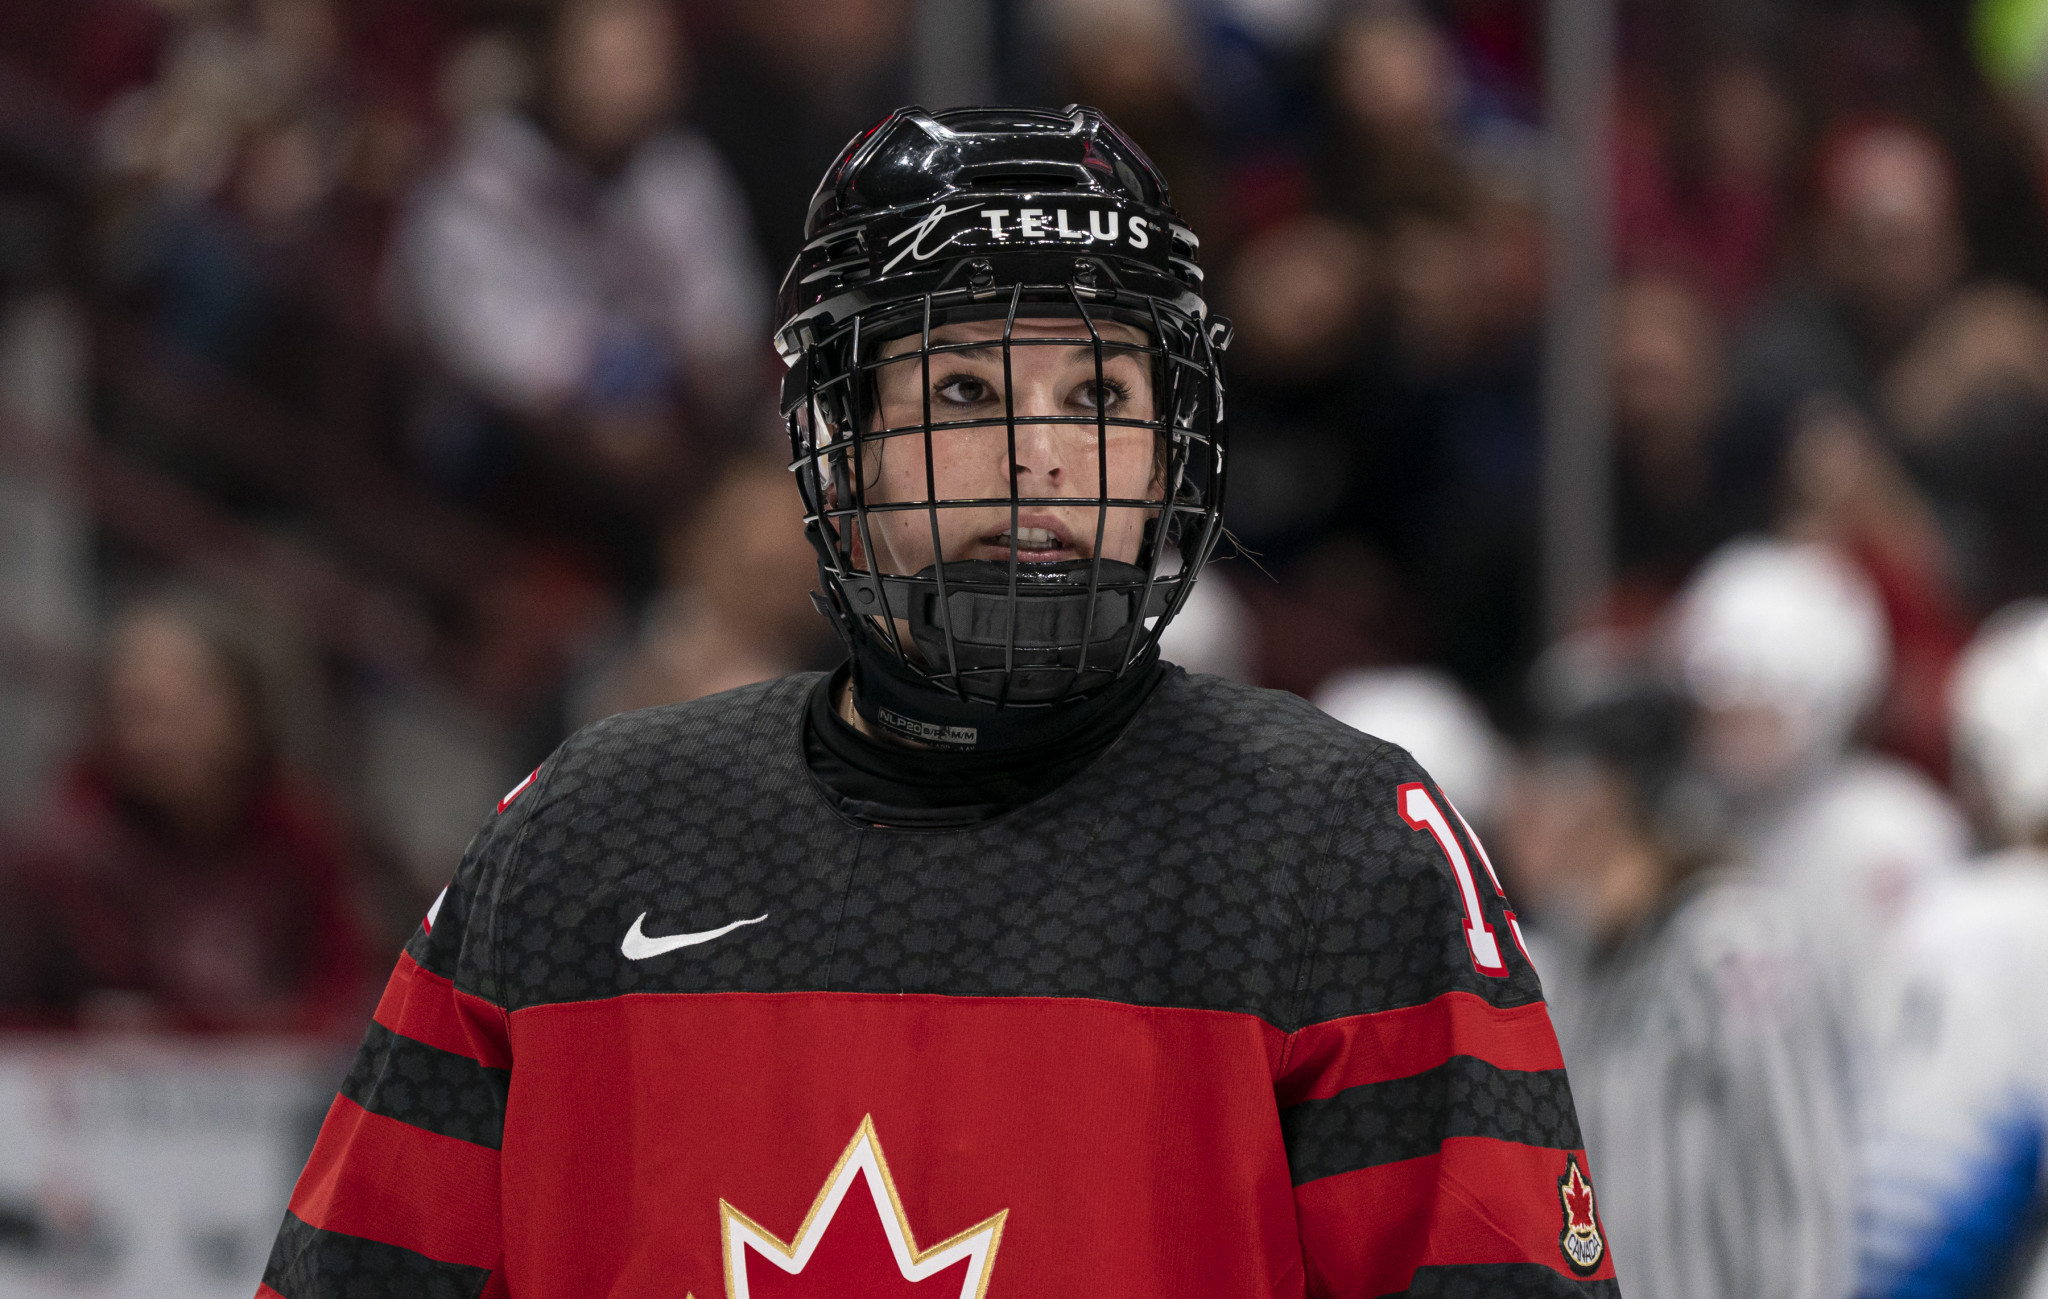 Mélodie Daoust scored twice in Canada's 4-0 win against Switzerland, and the tournament's leading scorer has now notched six goals and 12 points in Calgary ©Getty Images